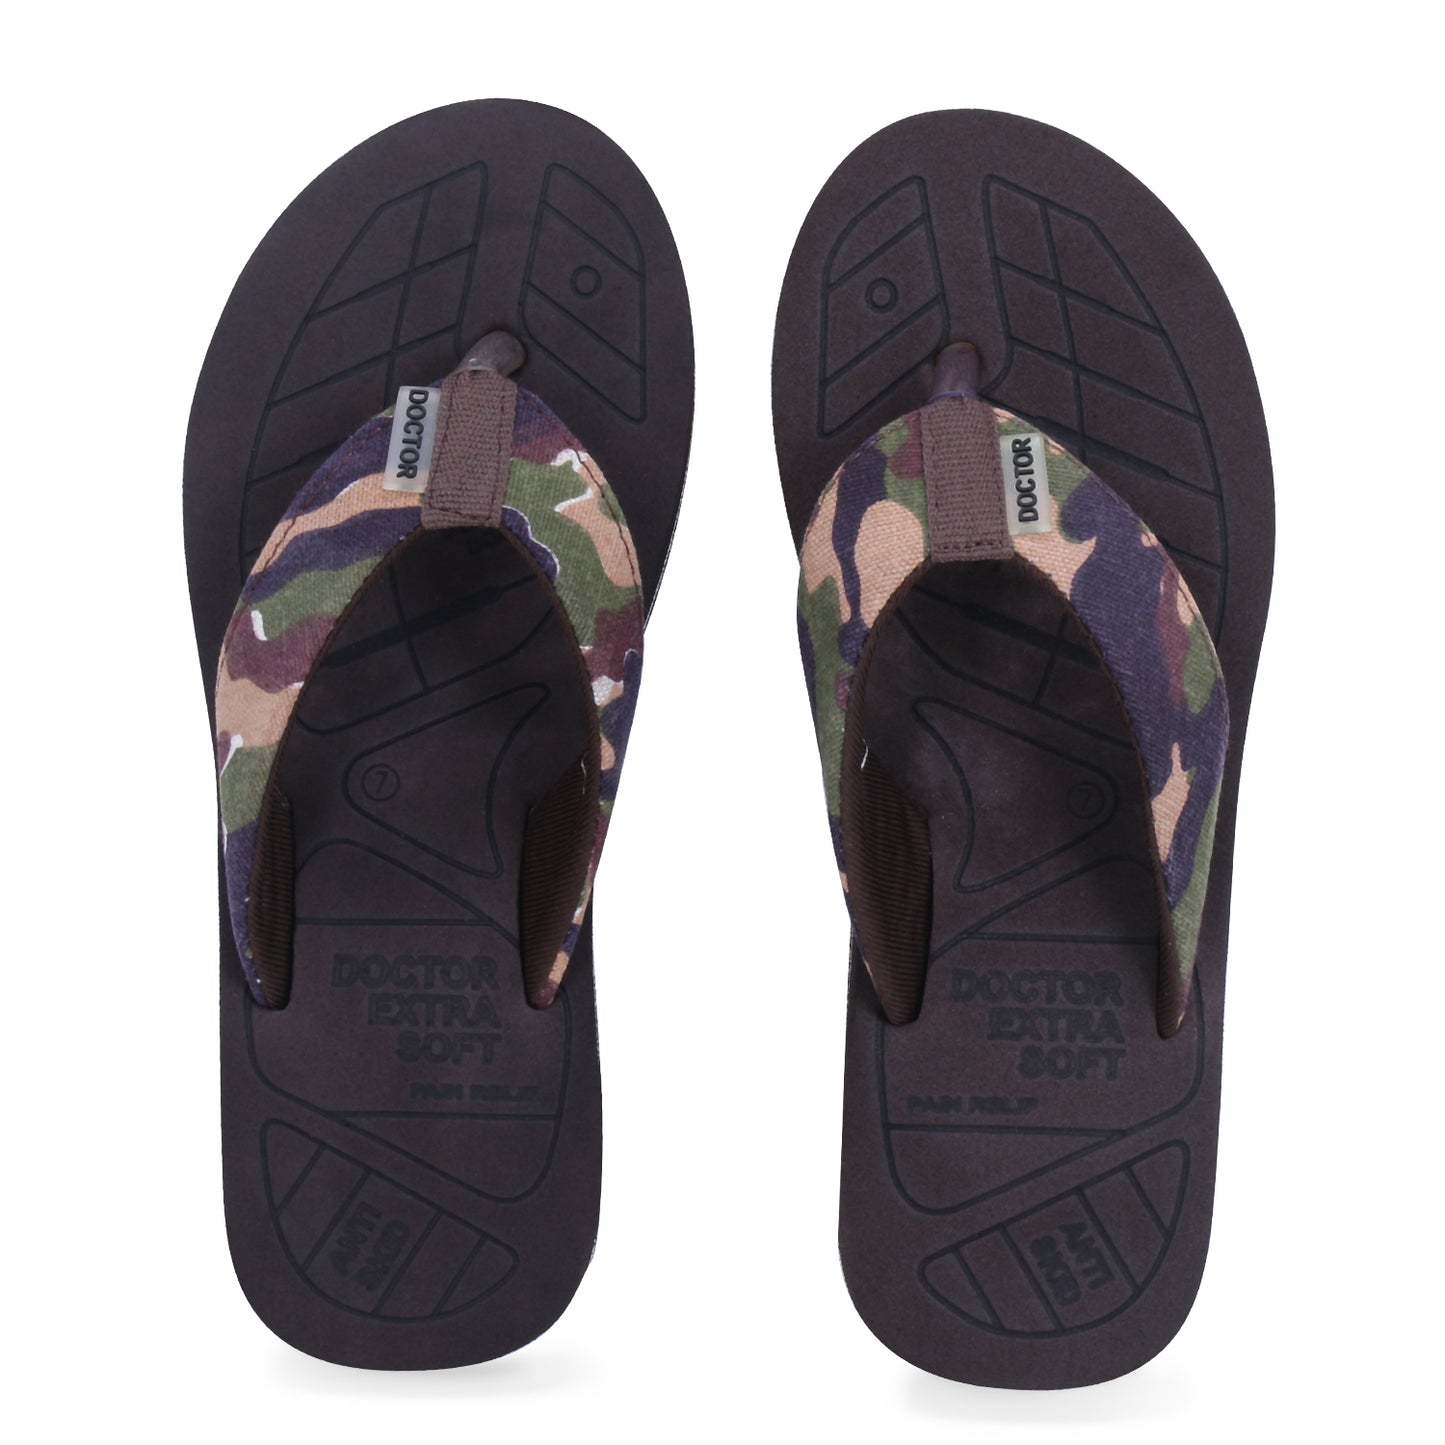 DOCTOR EXTRA SOFT D-55 Men's Camo Care Orthopaedic & Diabetic Adjustable Strap Super Comfort Flipflops & House Slippers for Men’s and Boys